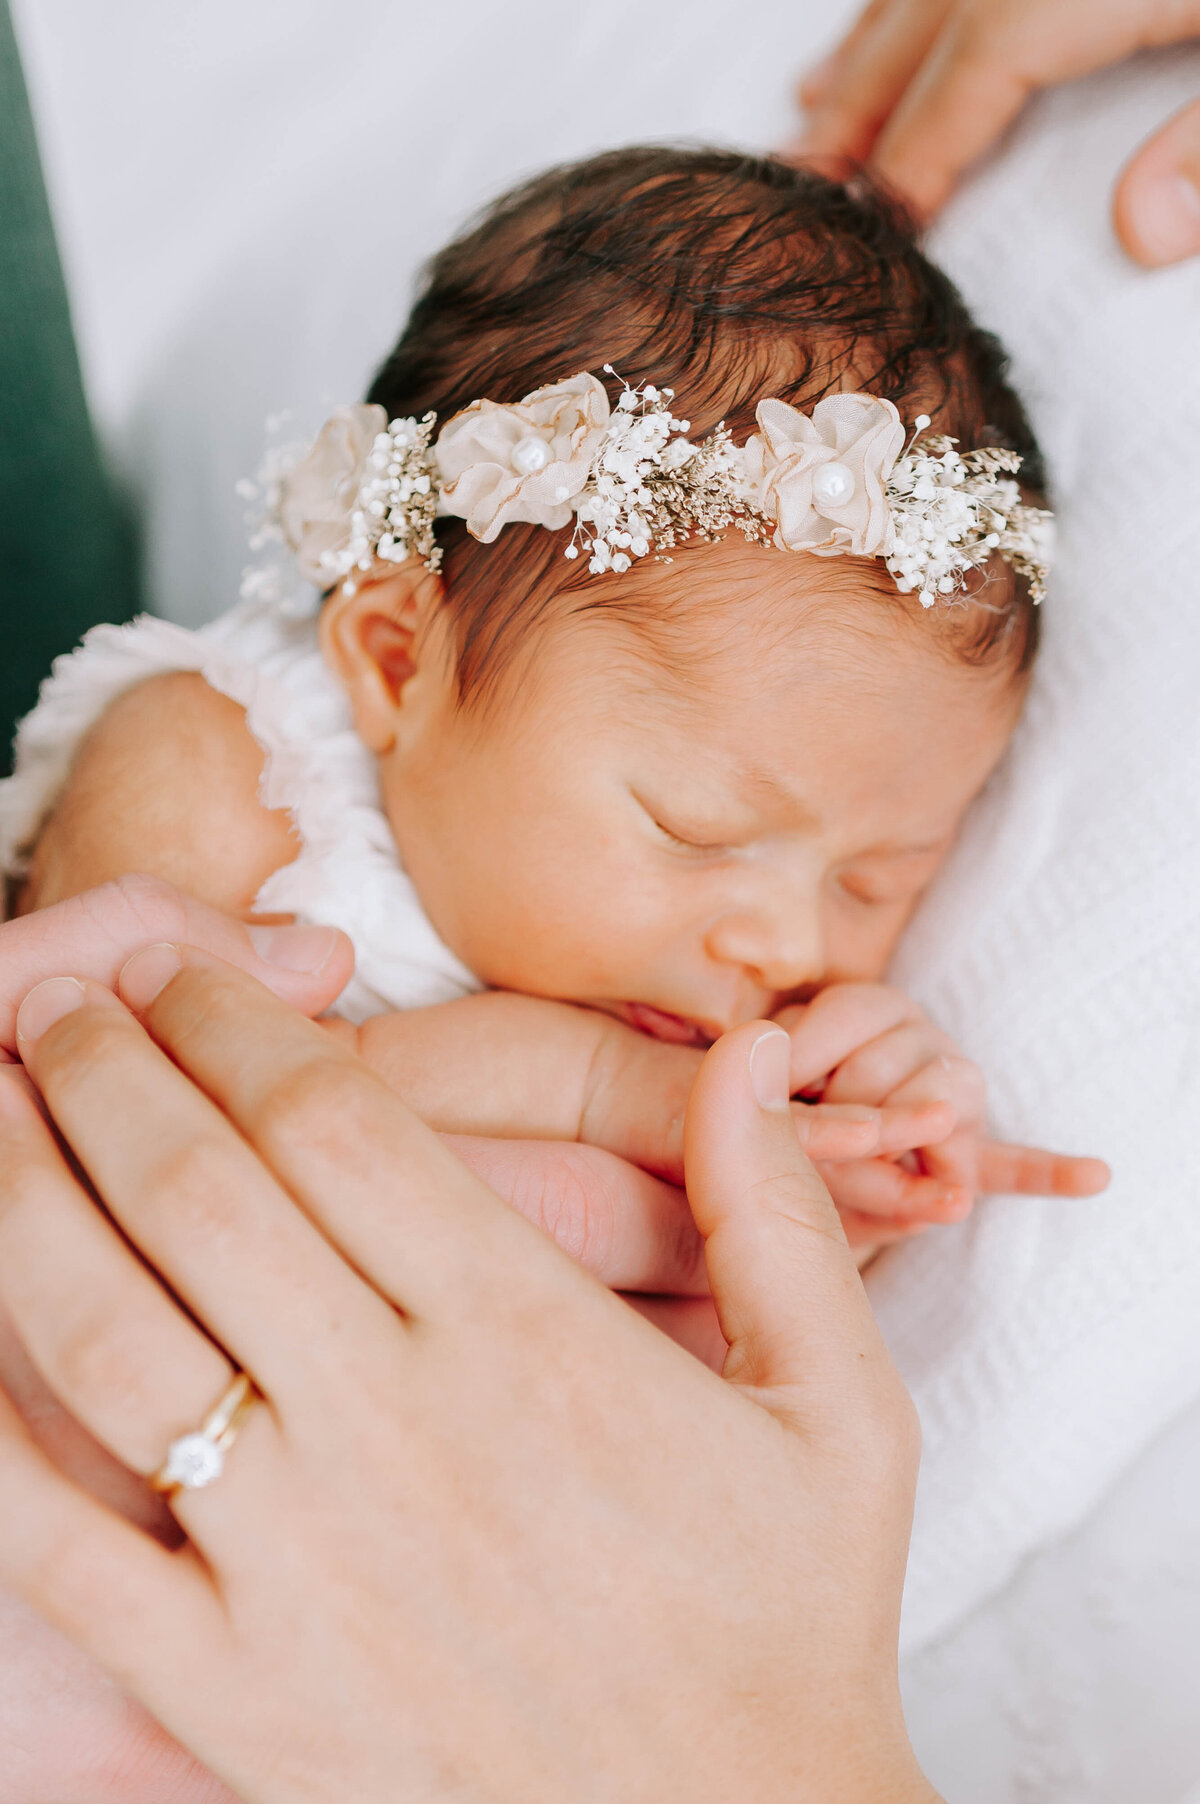 Springfield MO newborn photographer captures newborn baby laying down with parents hands holding her